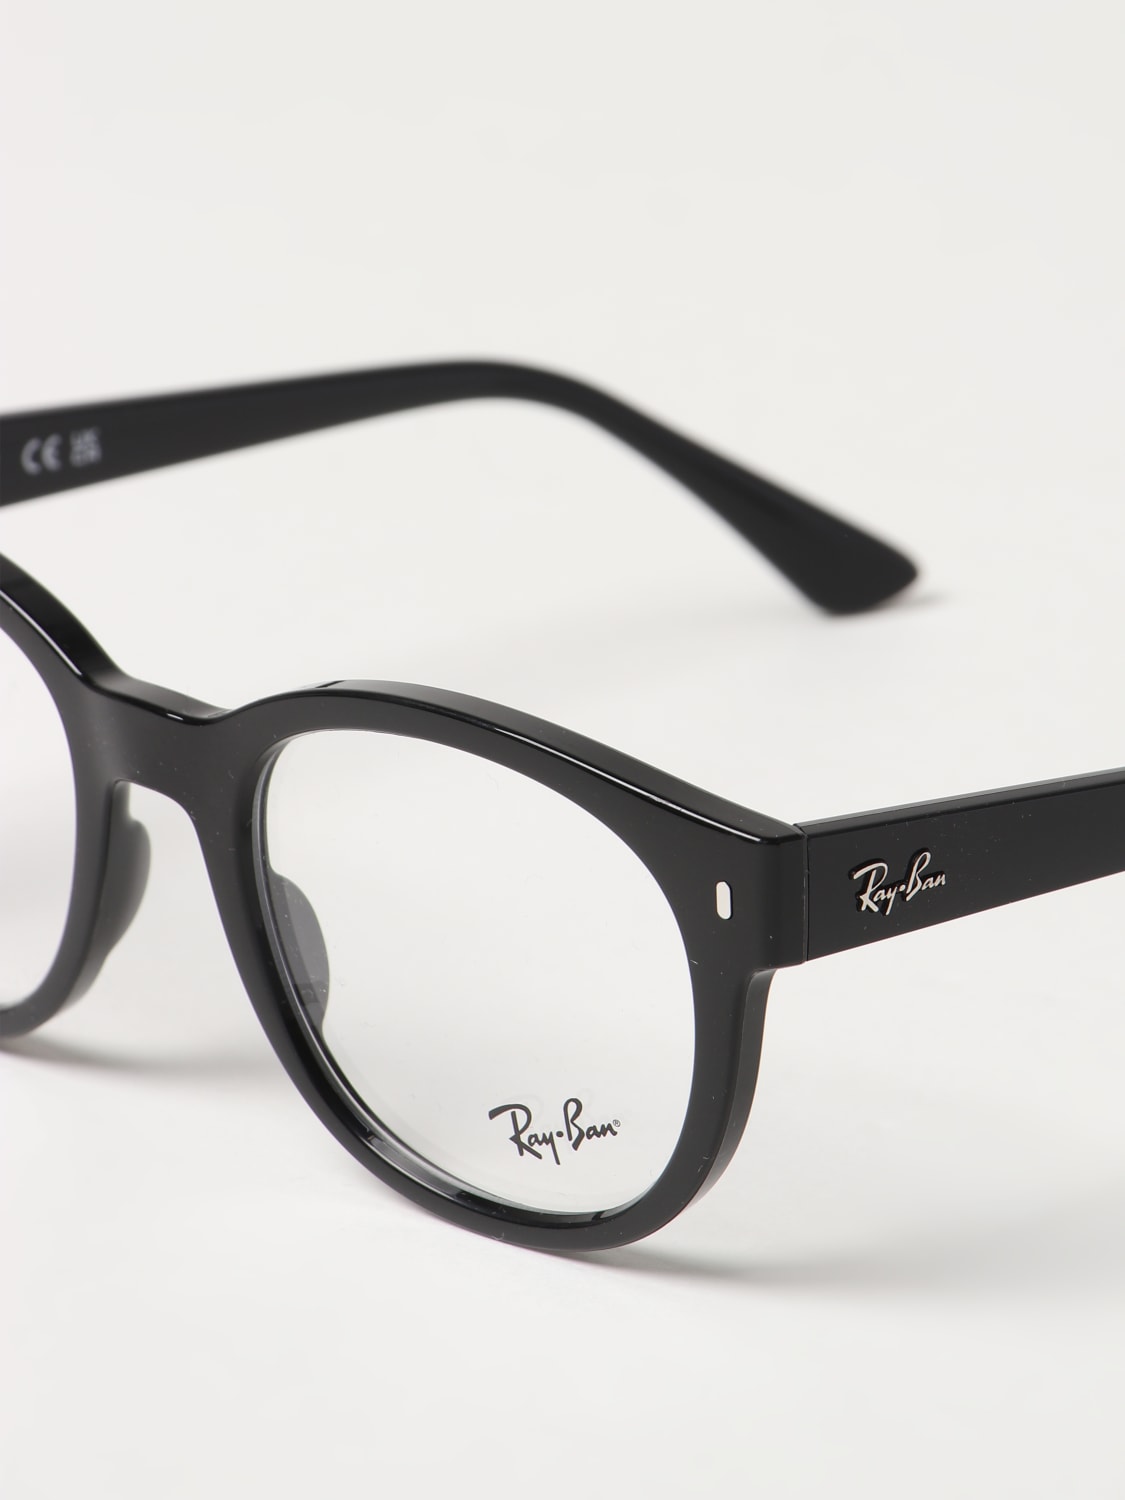 Lunettes Ray-ban Homme